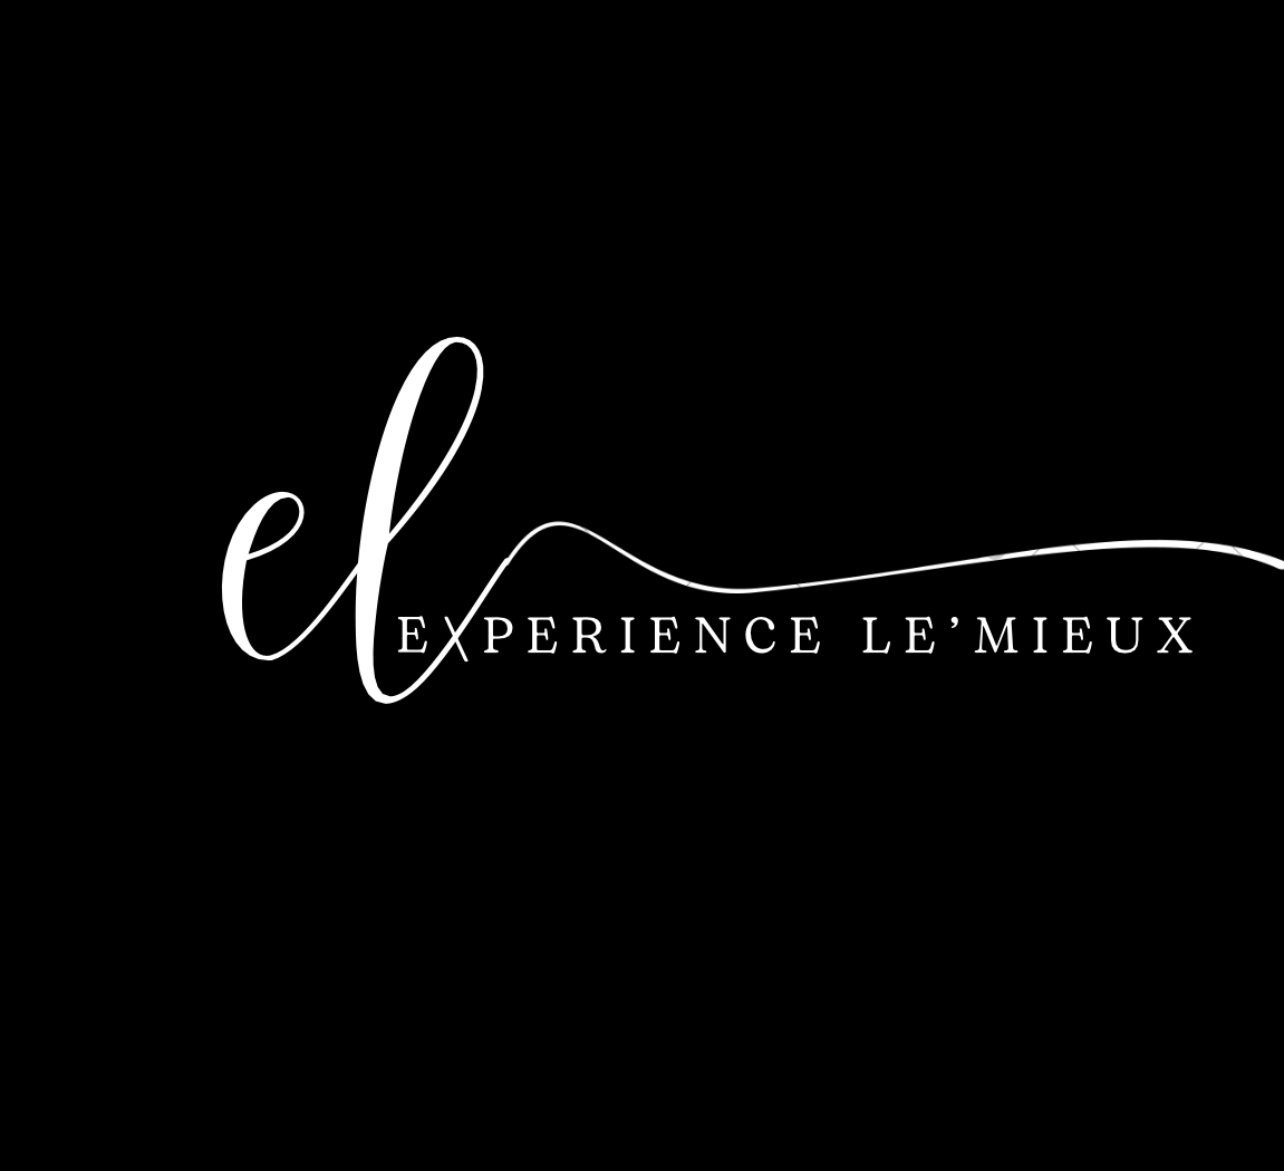 Welcome to Experience Le'Mieux